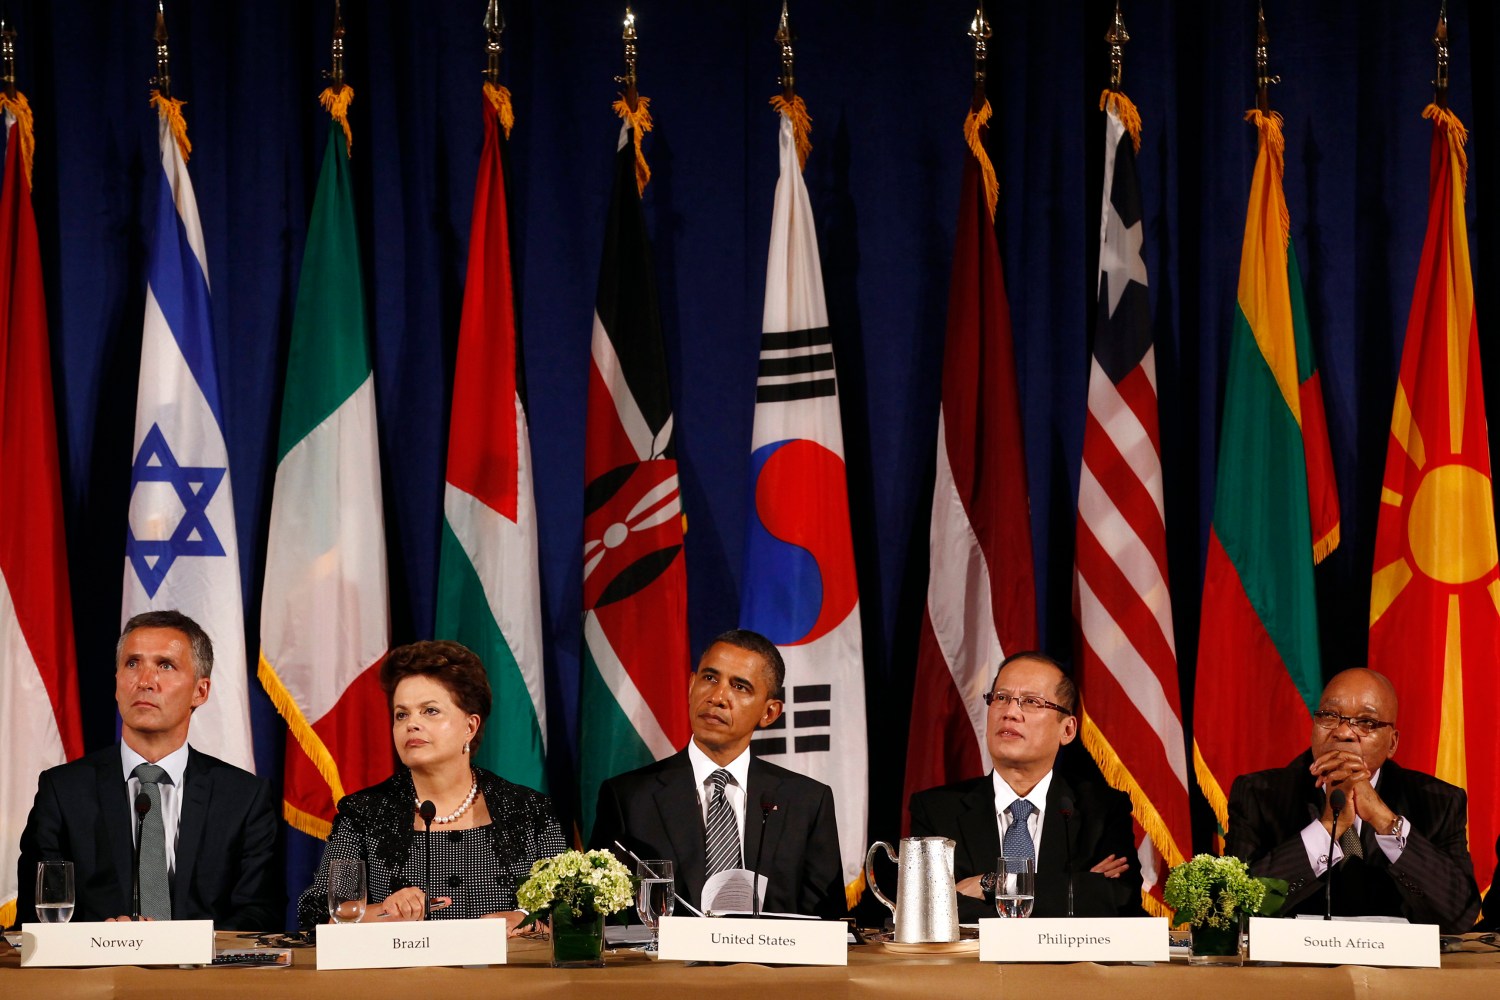 U.S. President Barack Obama (C) sits with Norway's Prime Minister Jens Stoltenberg, Brazil's President Dilma Rousseff, Philippines' President Benigno Aquino and South Africa's President Jacob Zuma (L-R) as he hosts the Open Government Partnership event in New York